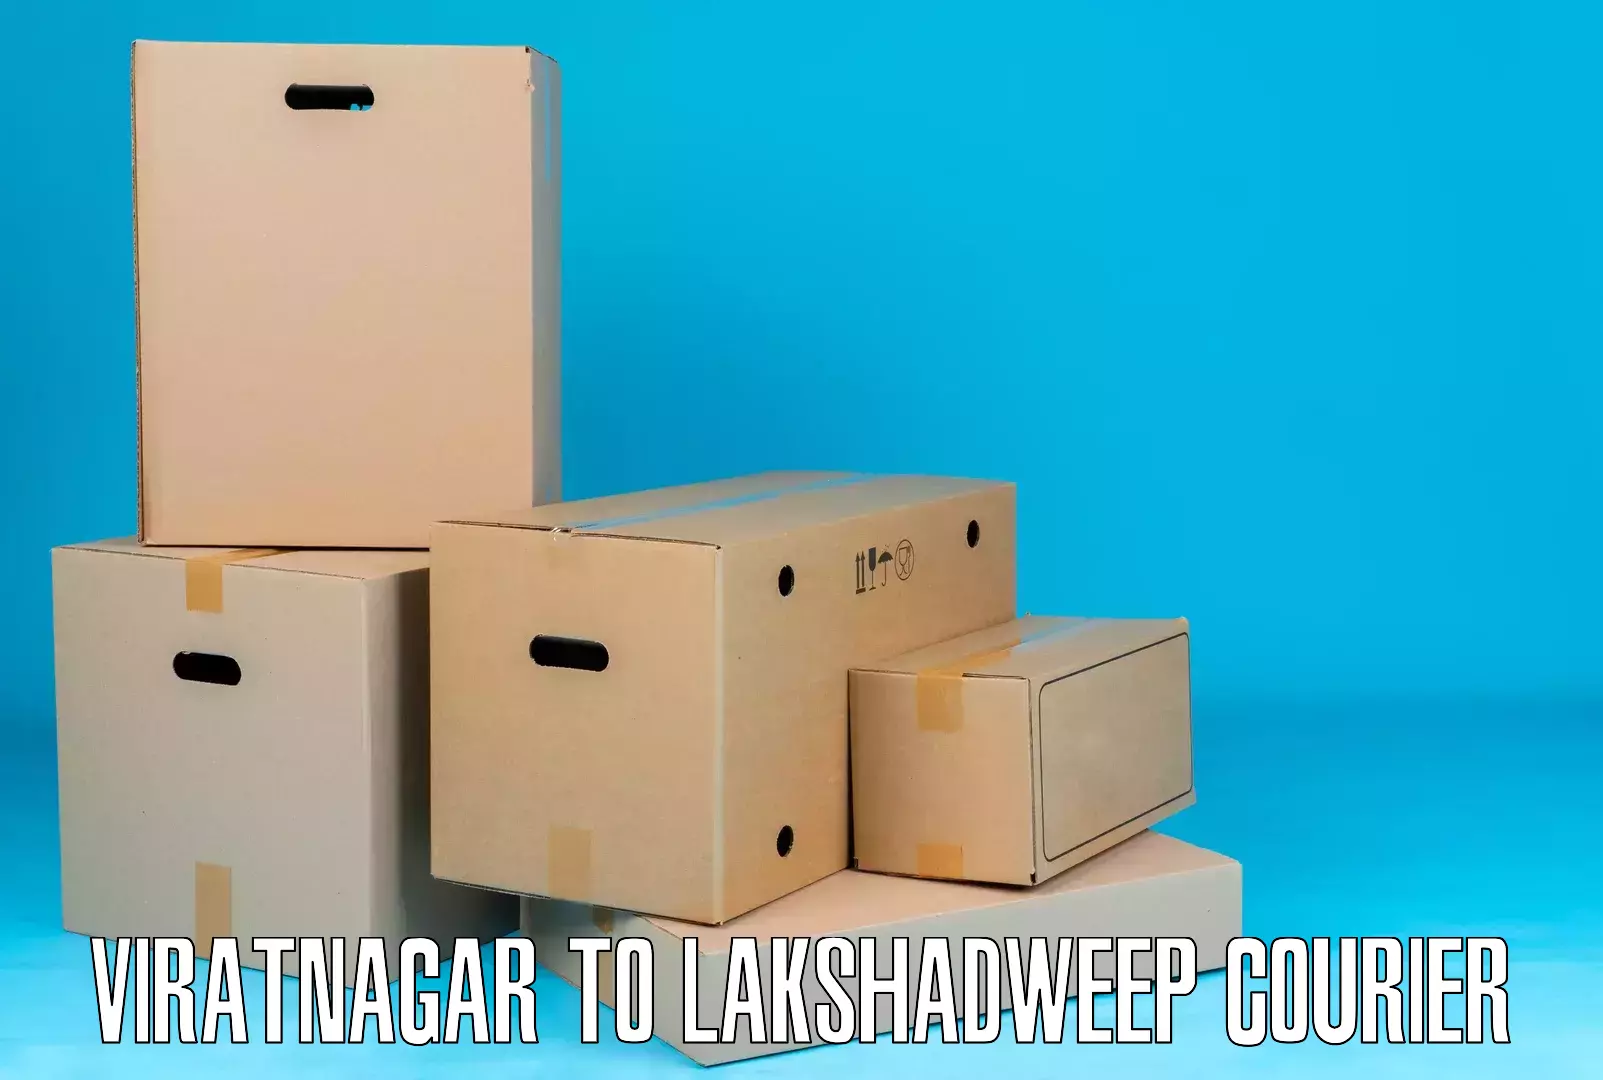 Next-day delivery options in Viratnagar to Lakshadweep